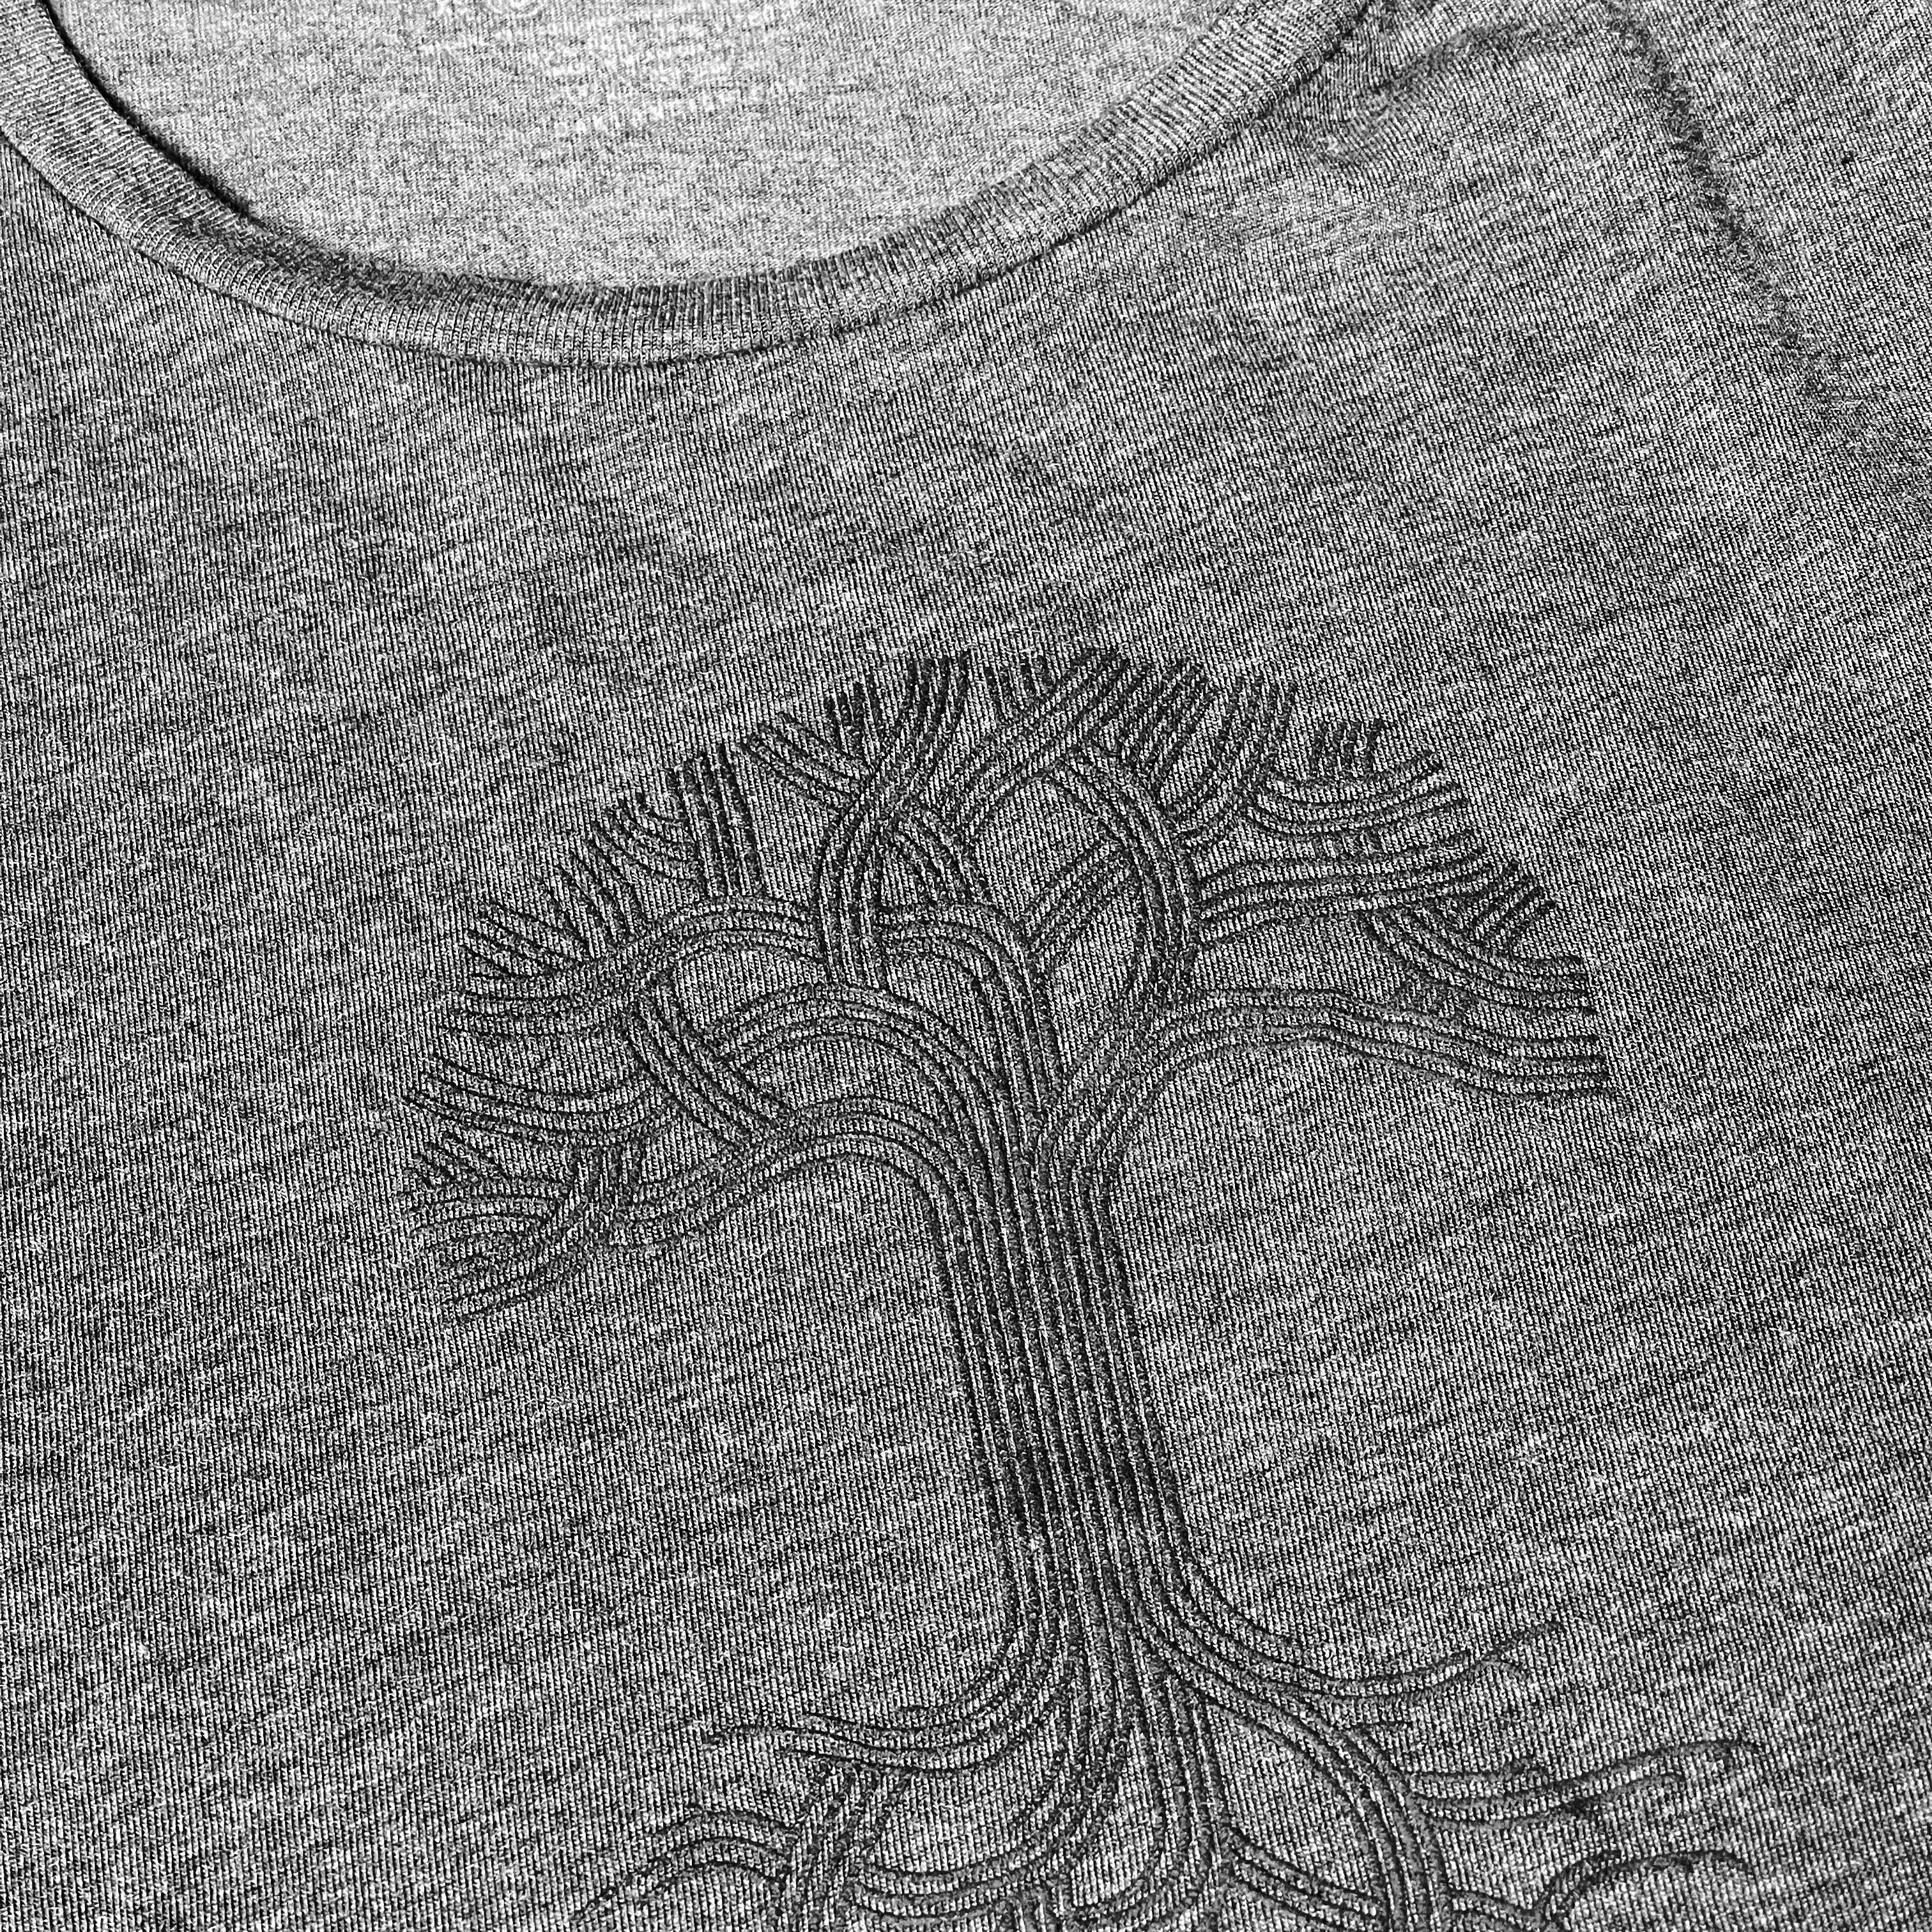 Close-up black classic Oaklandish tree logo and wordmark on chest of a grey women’s cut tank top.